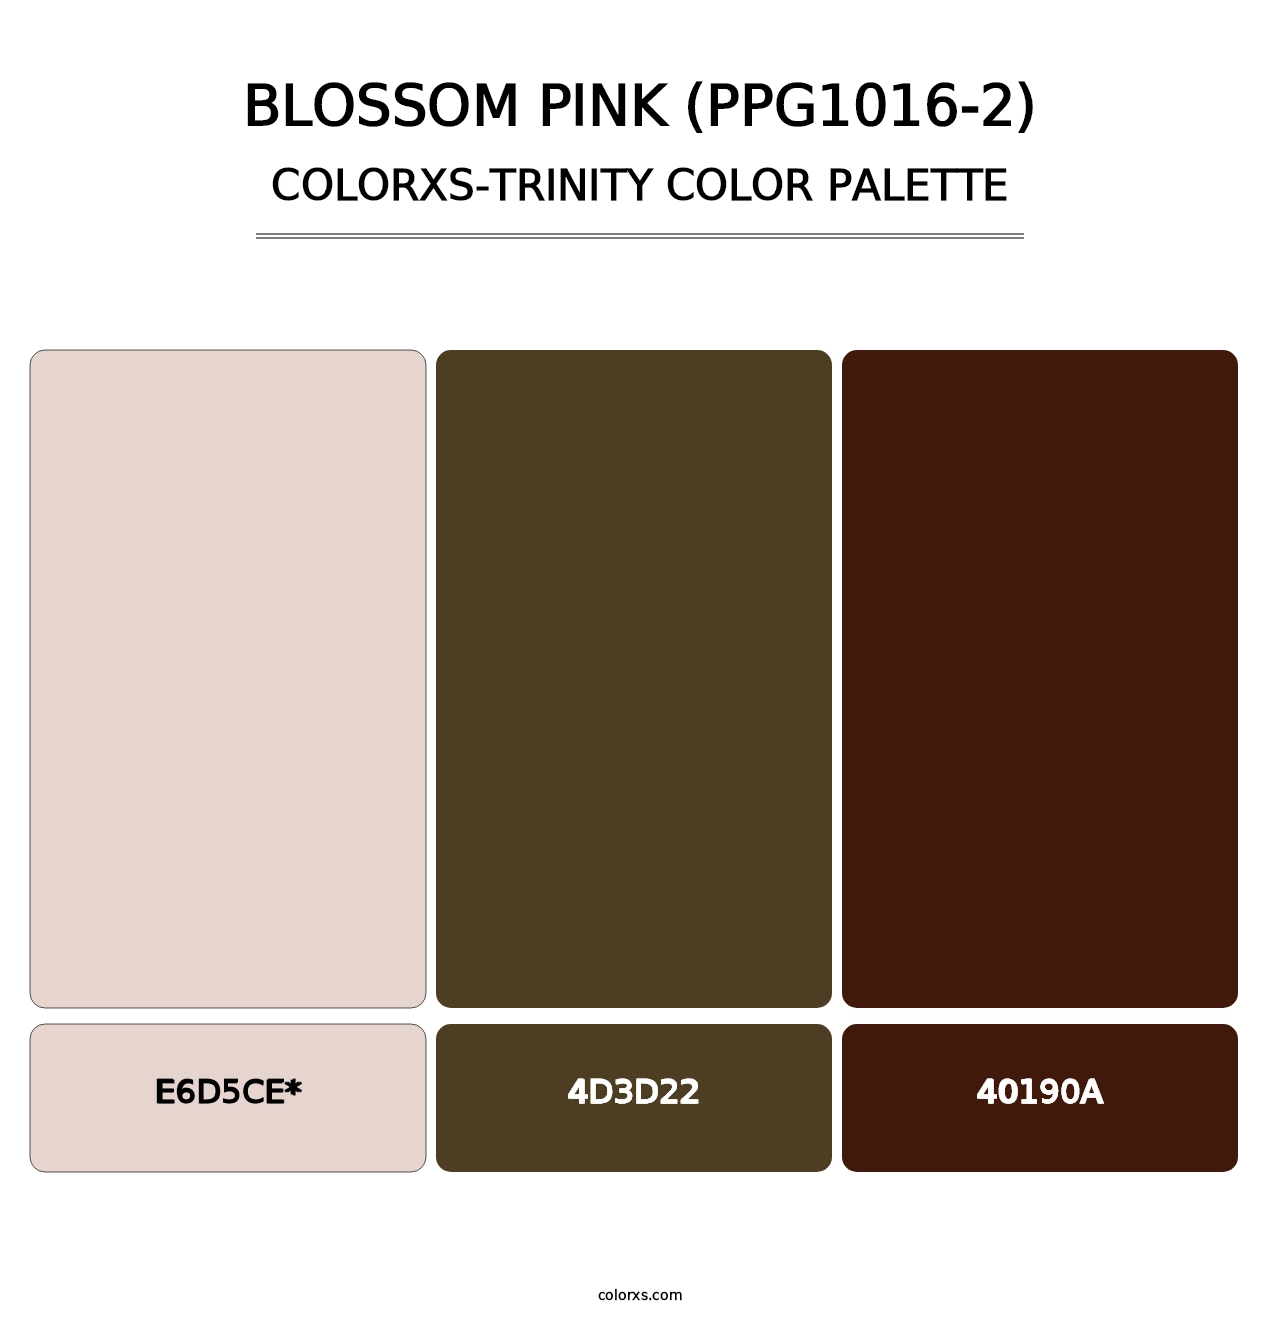 Blossom Pink (PPG1016-2) - Colorxs Trinity Palette